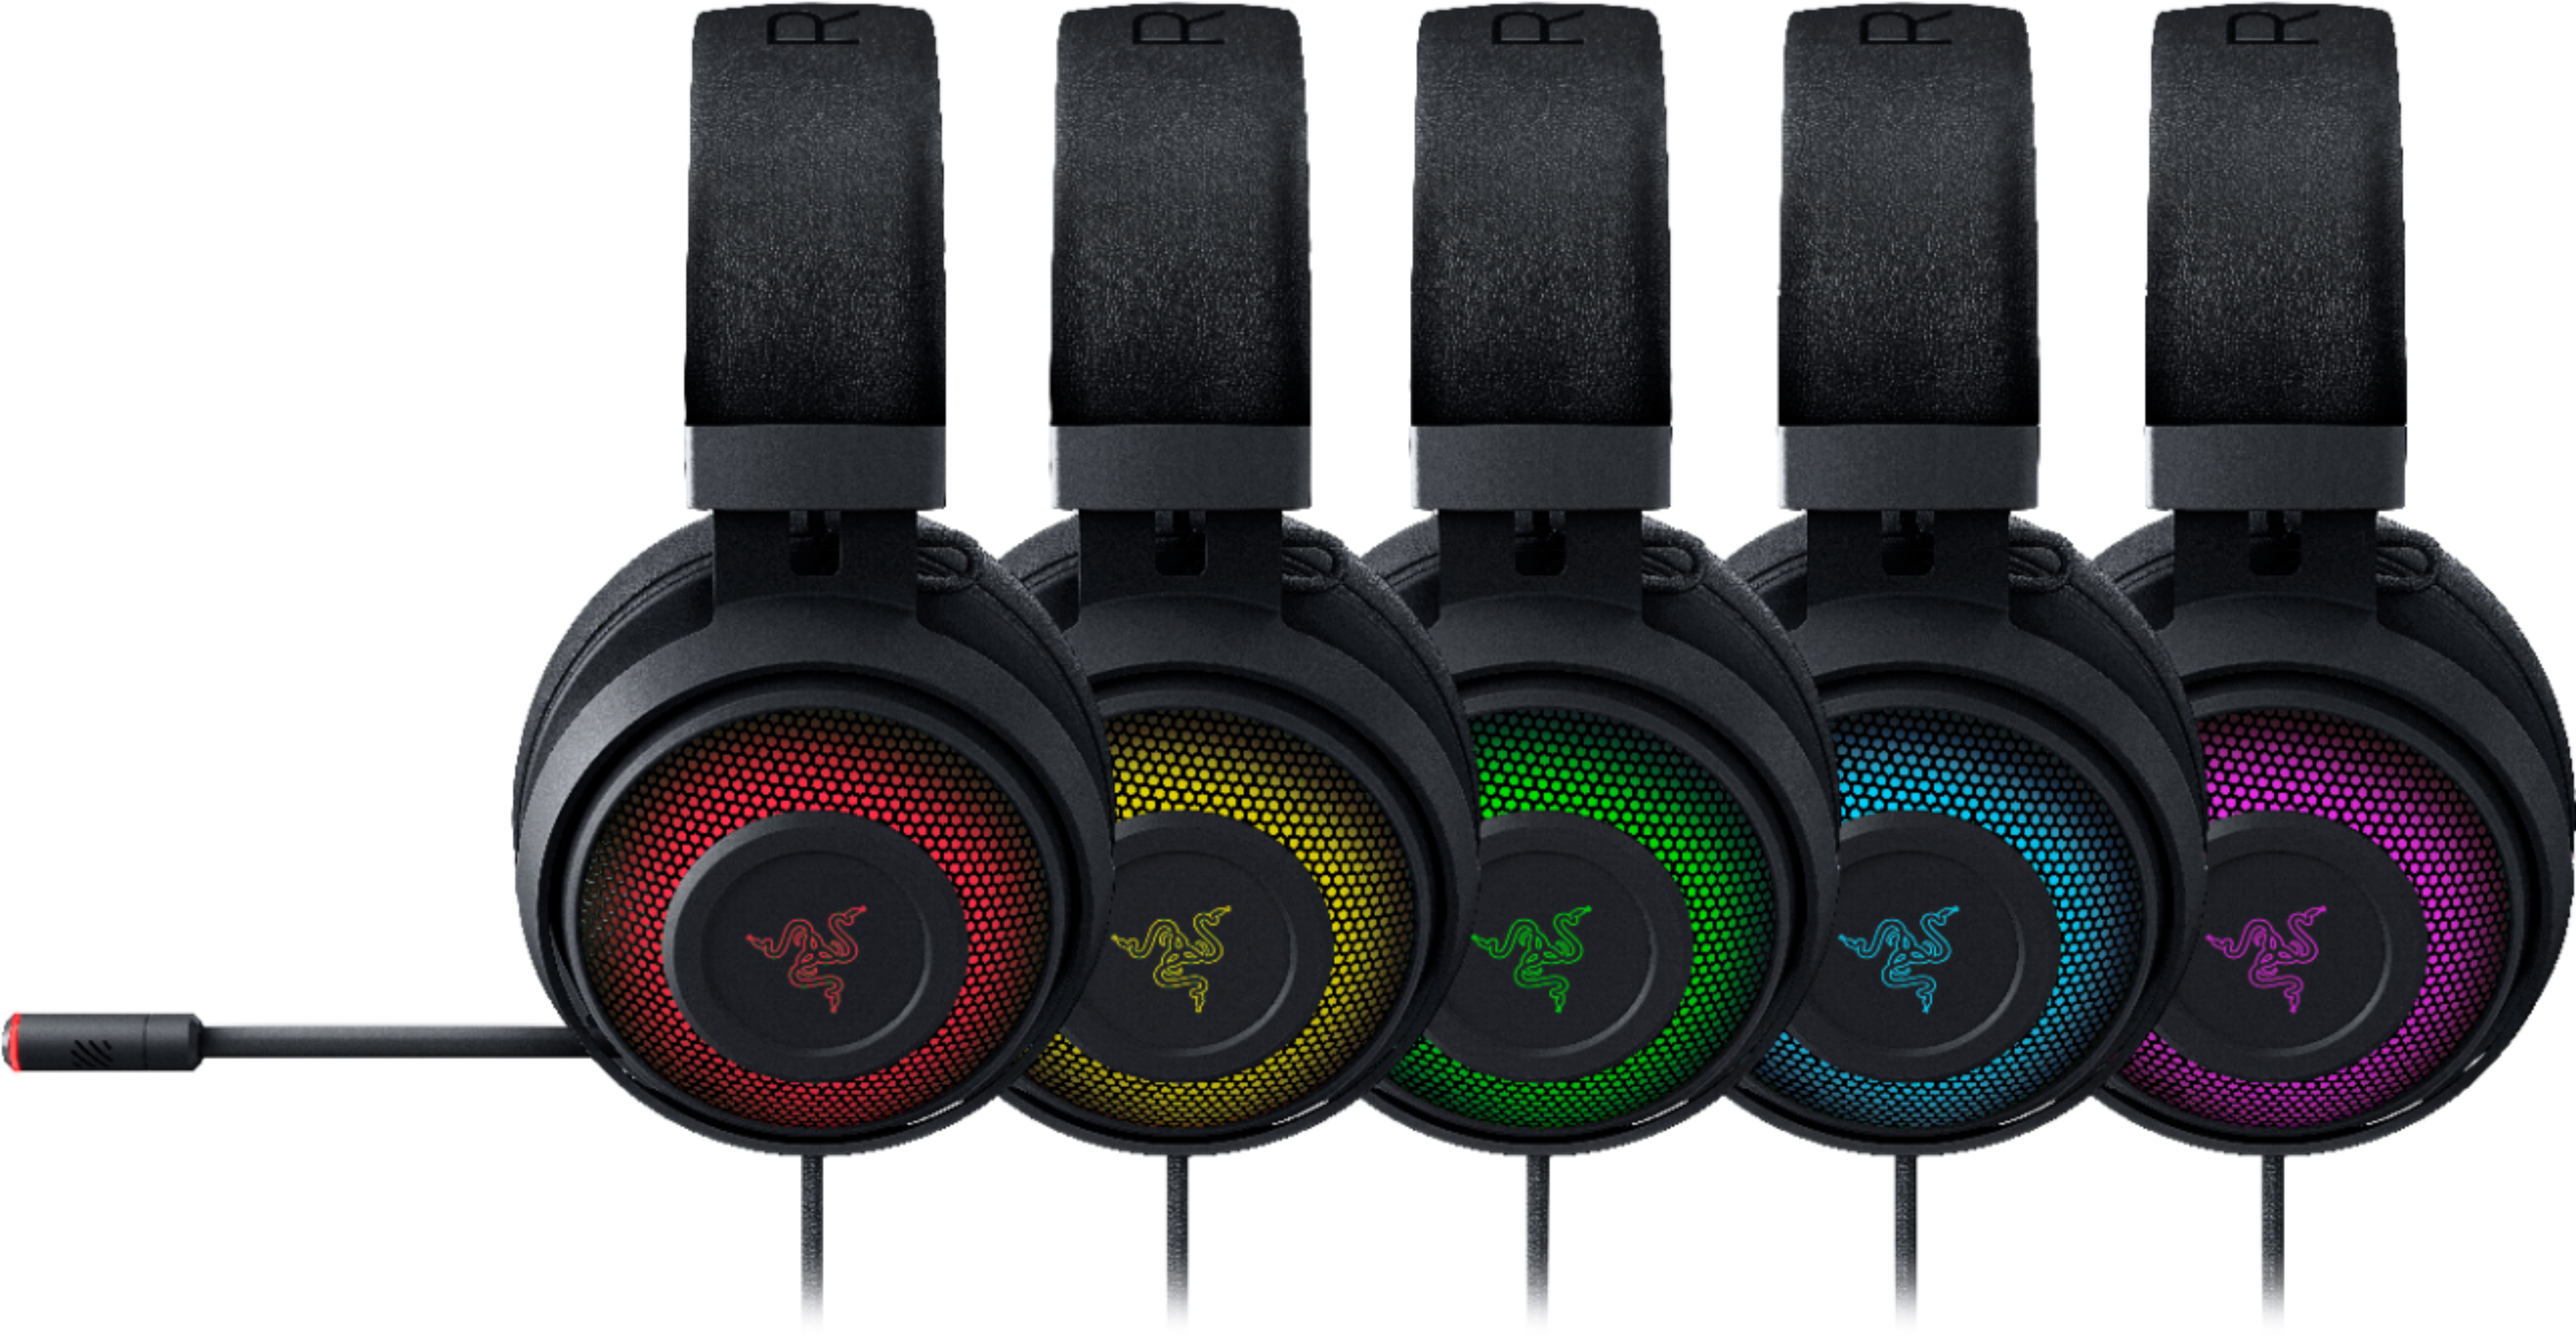 Razer Kraken Ultimate – USB Gaming Headset (Gaming Headphones for PC, PS4  and Switch Dock with Surround Sound, ANC Microphone and RGB Chroma)